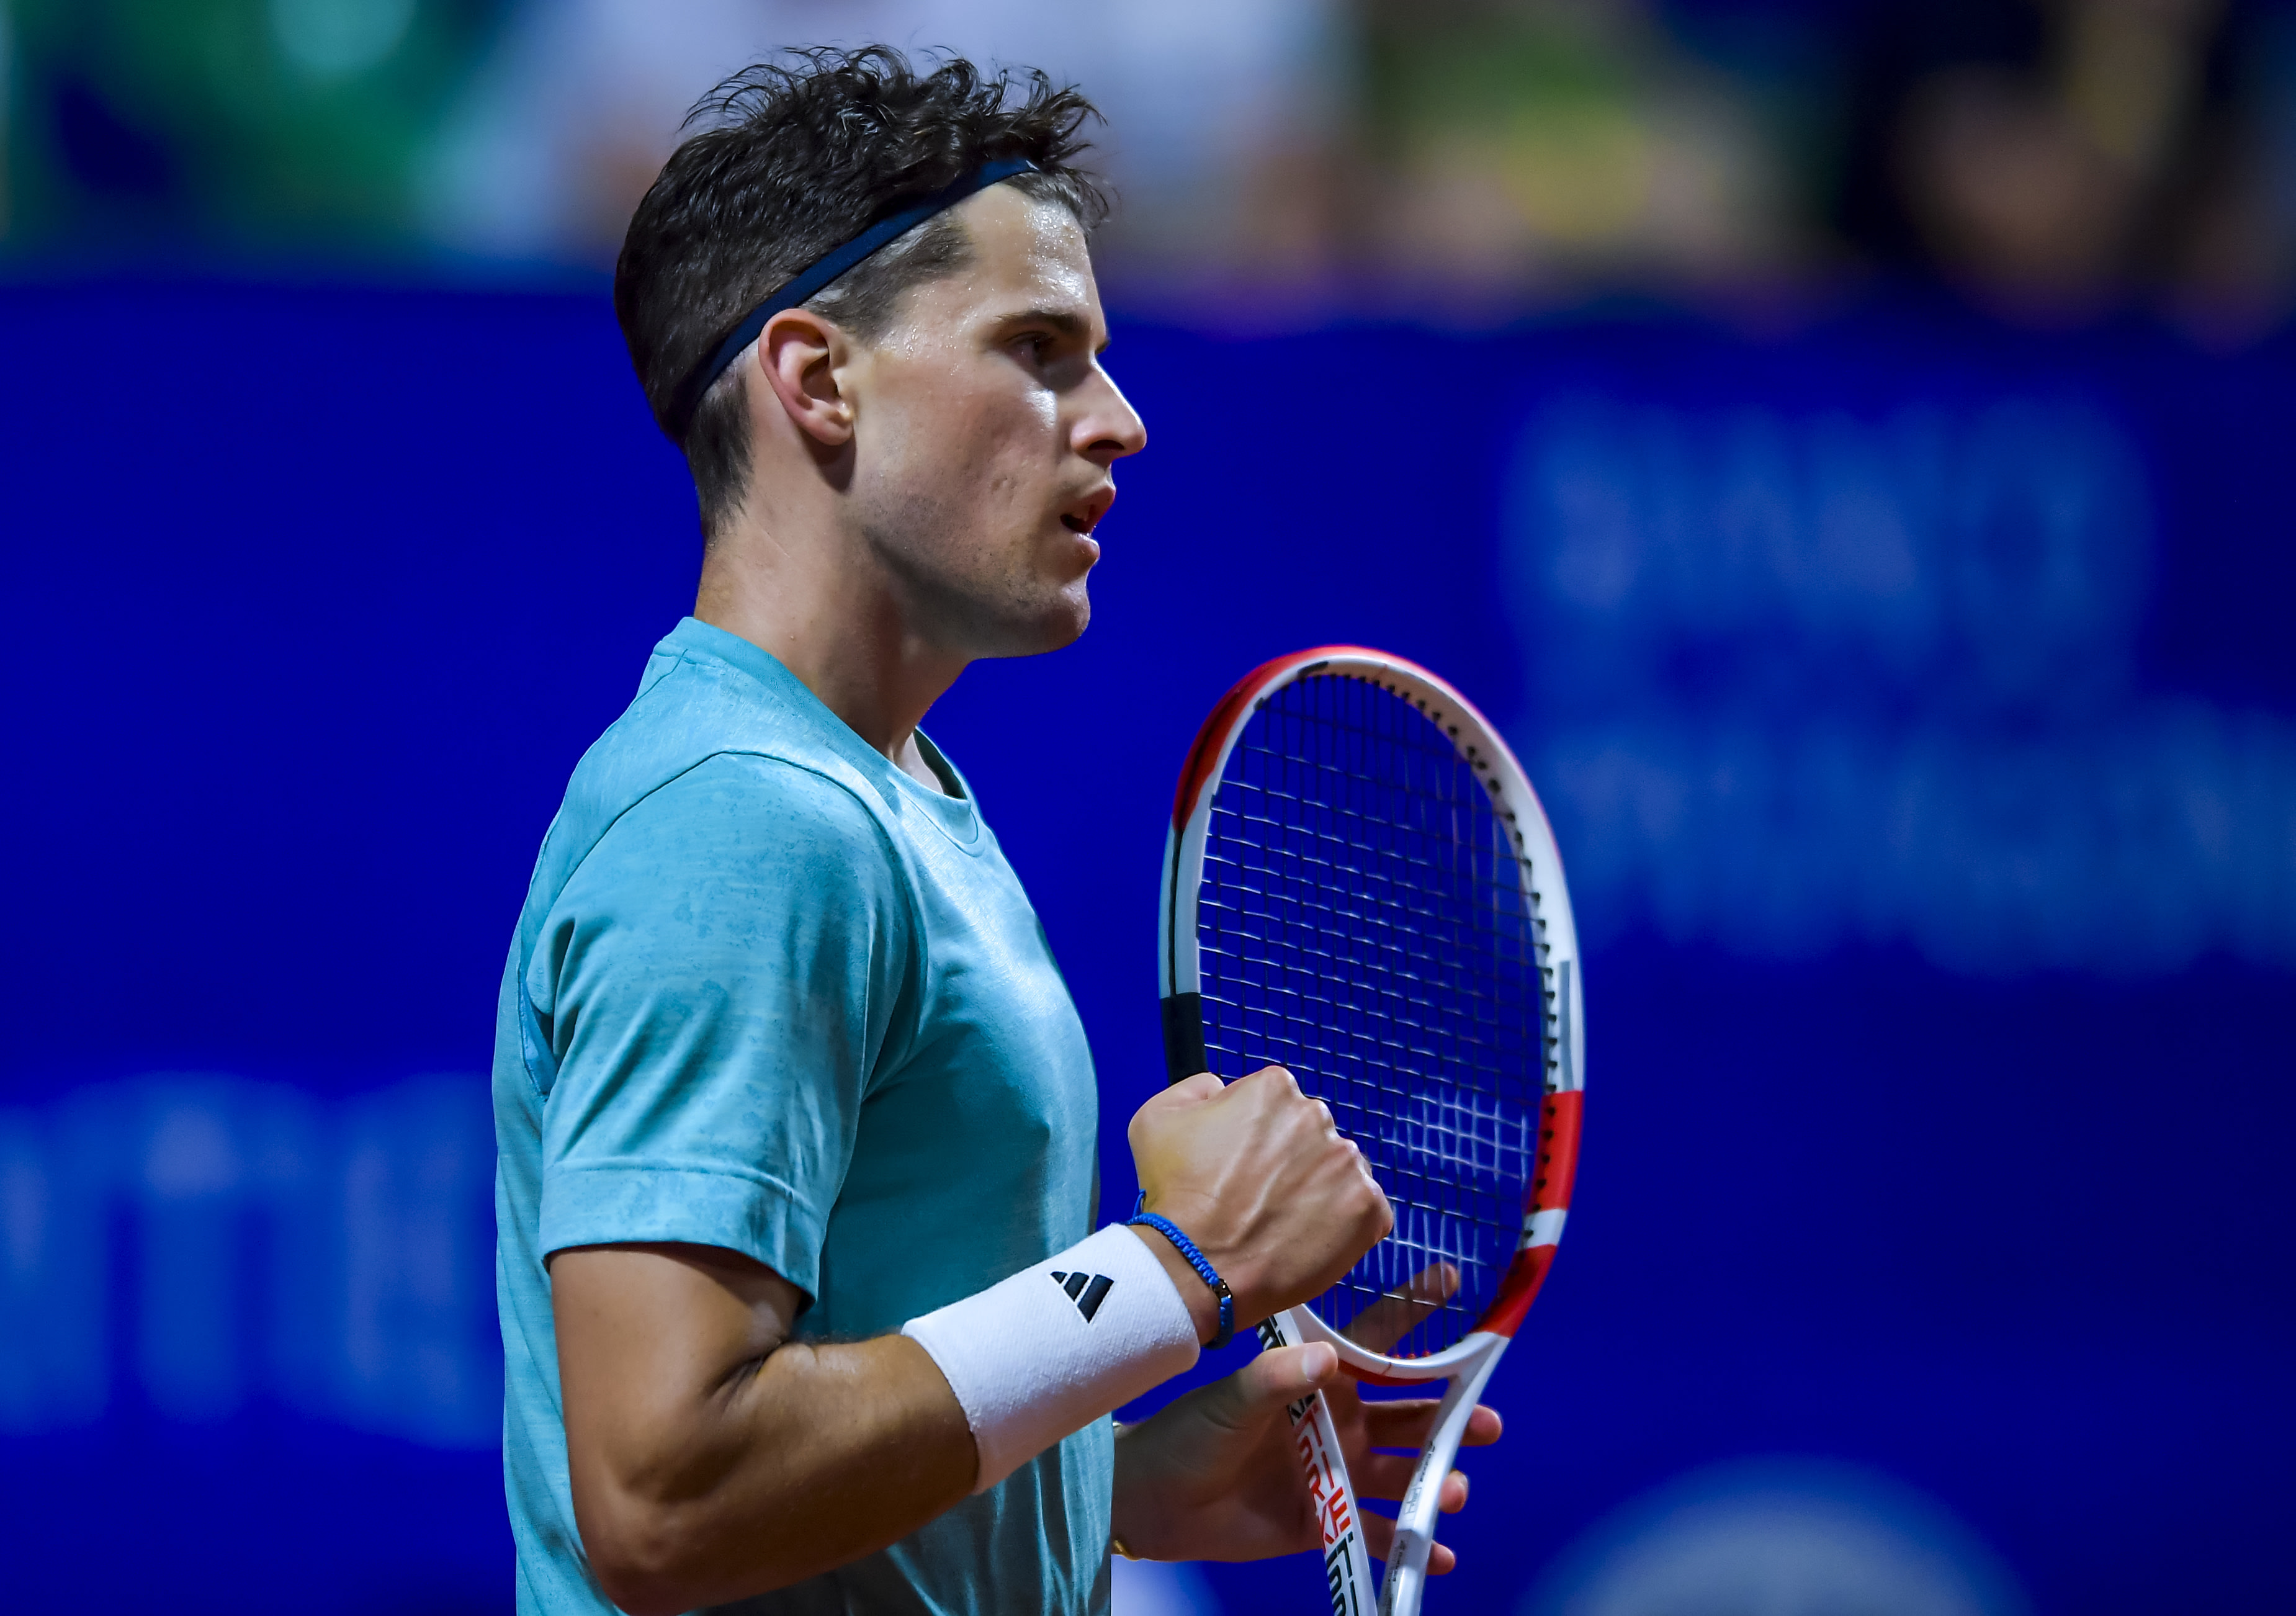 Dominic Thiems South American tour ends with three losses in four matches